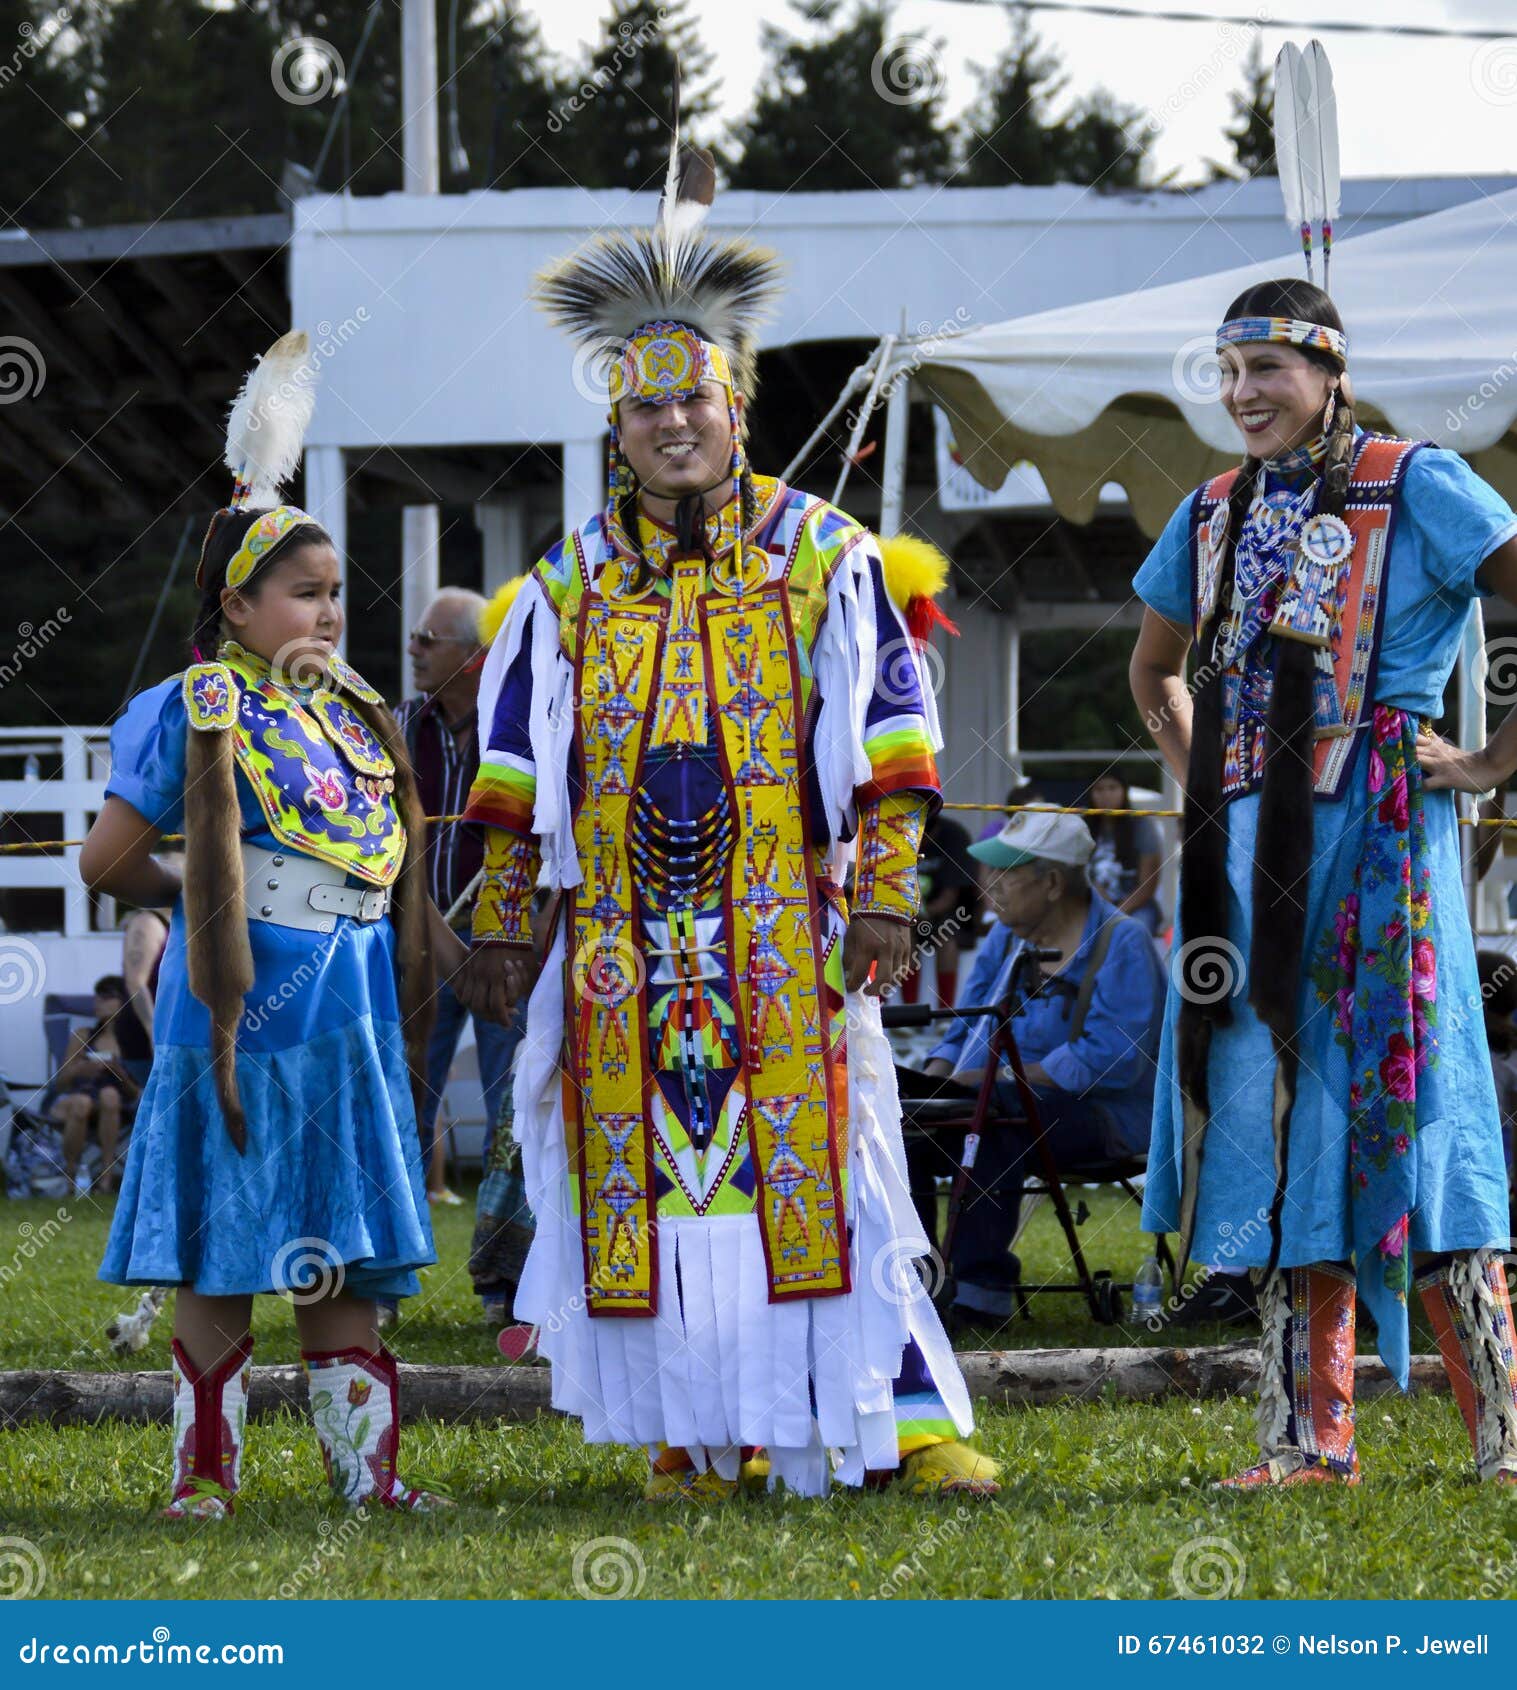 native-american-micmac-family-dancers-smiling-editorial-image